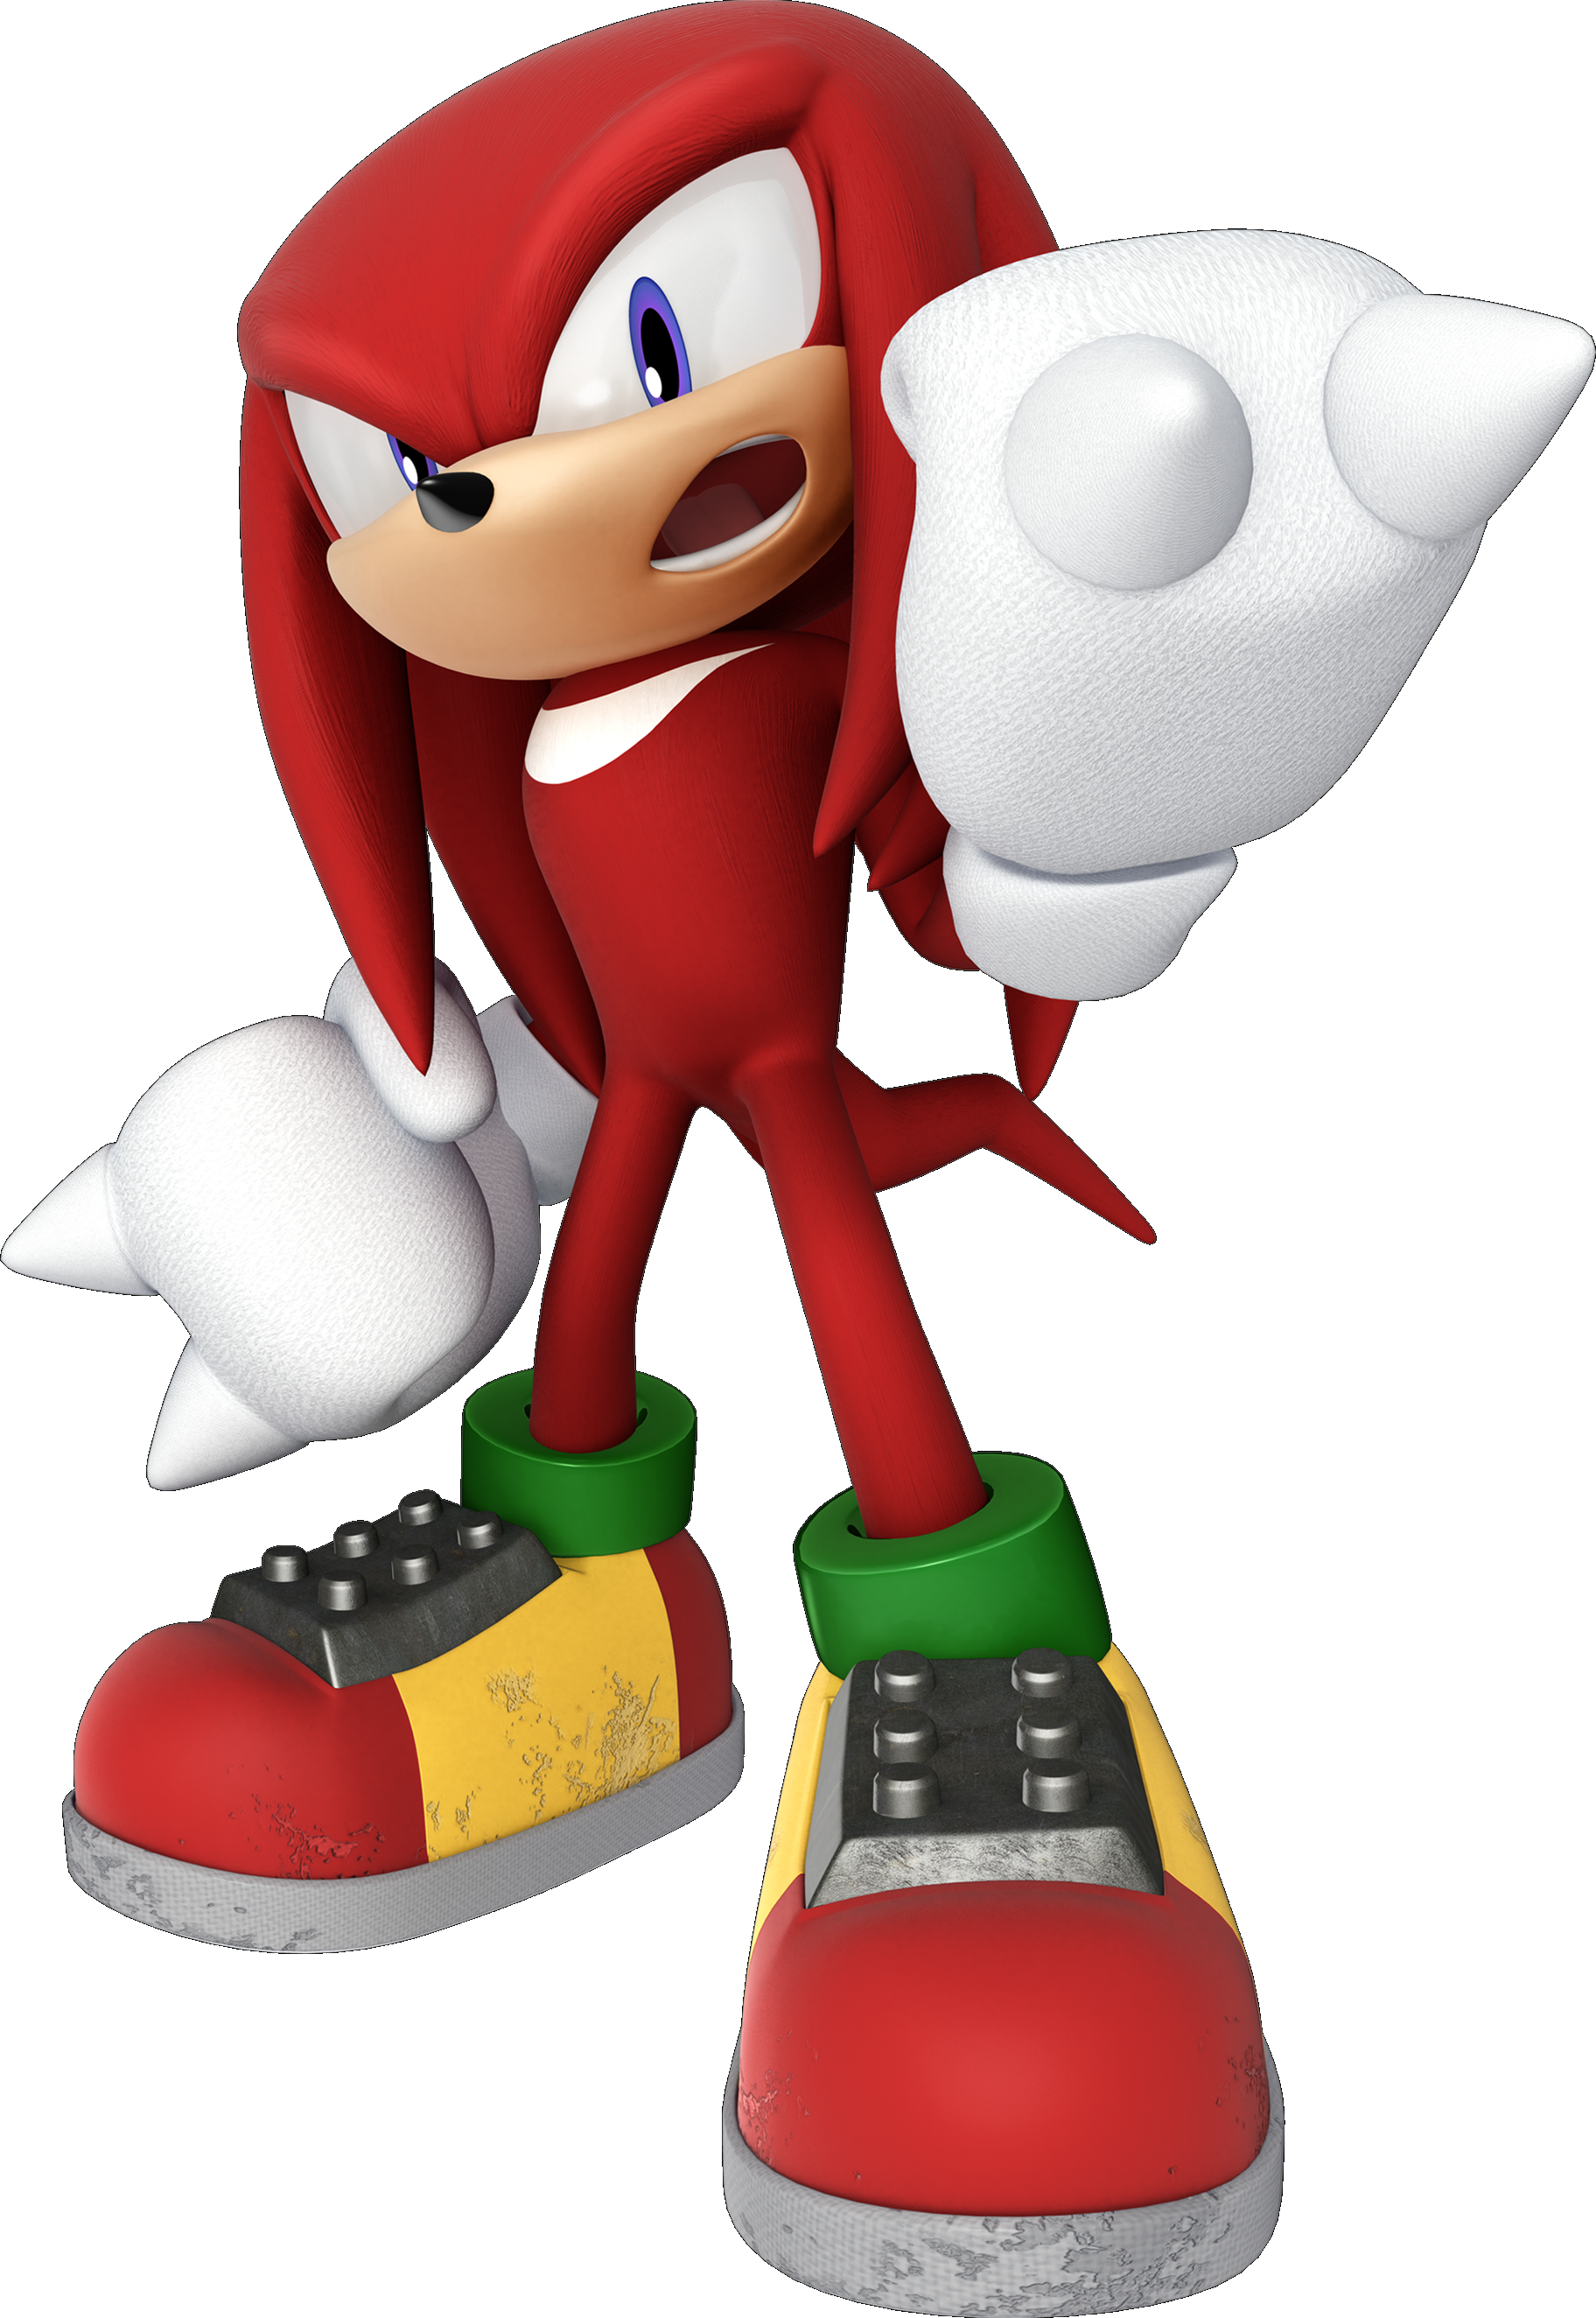 Knuckles the Echidna | Sonic the Hedgehog Fanon Wiki | FANDOM powered